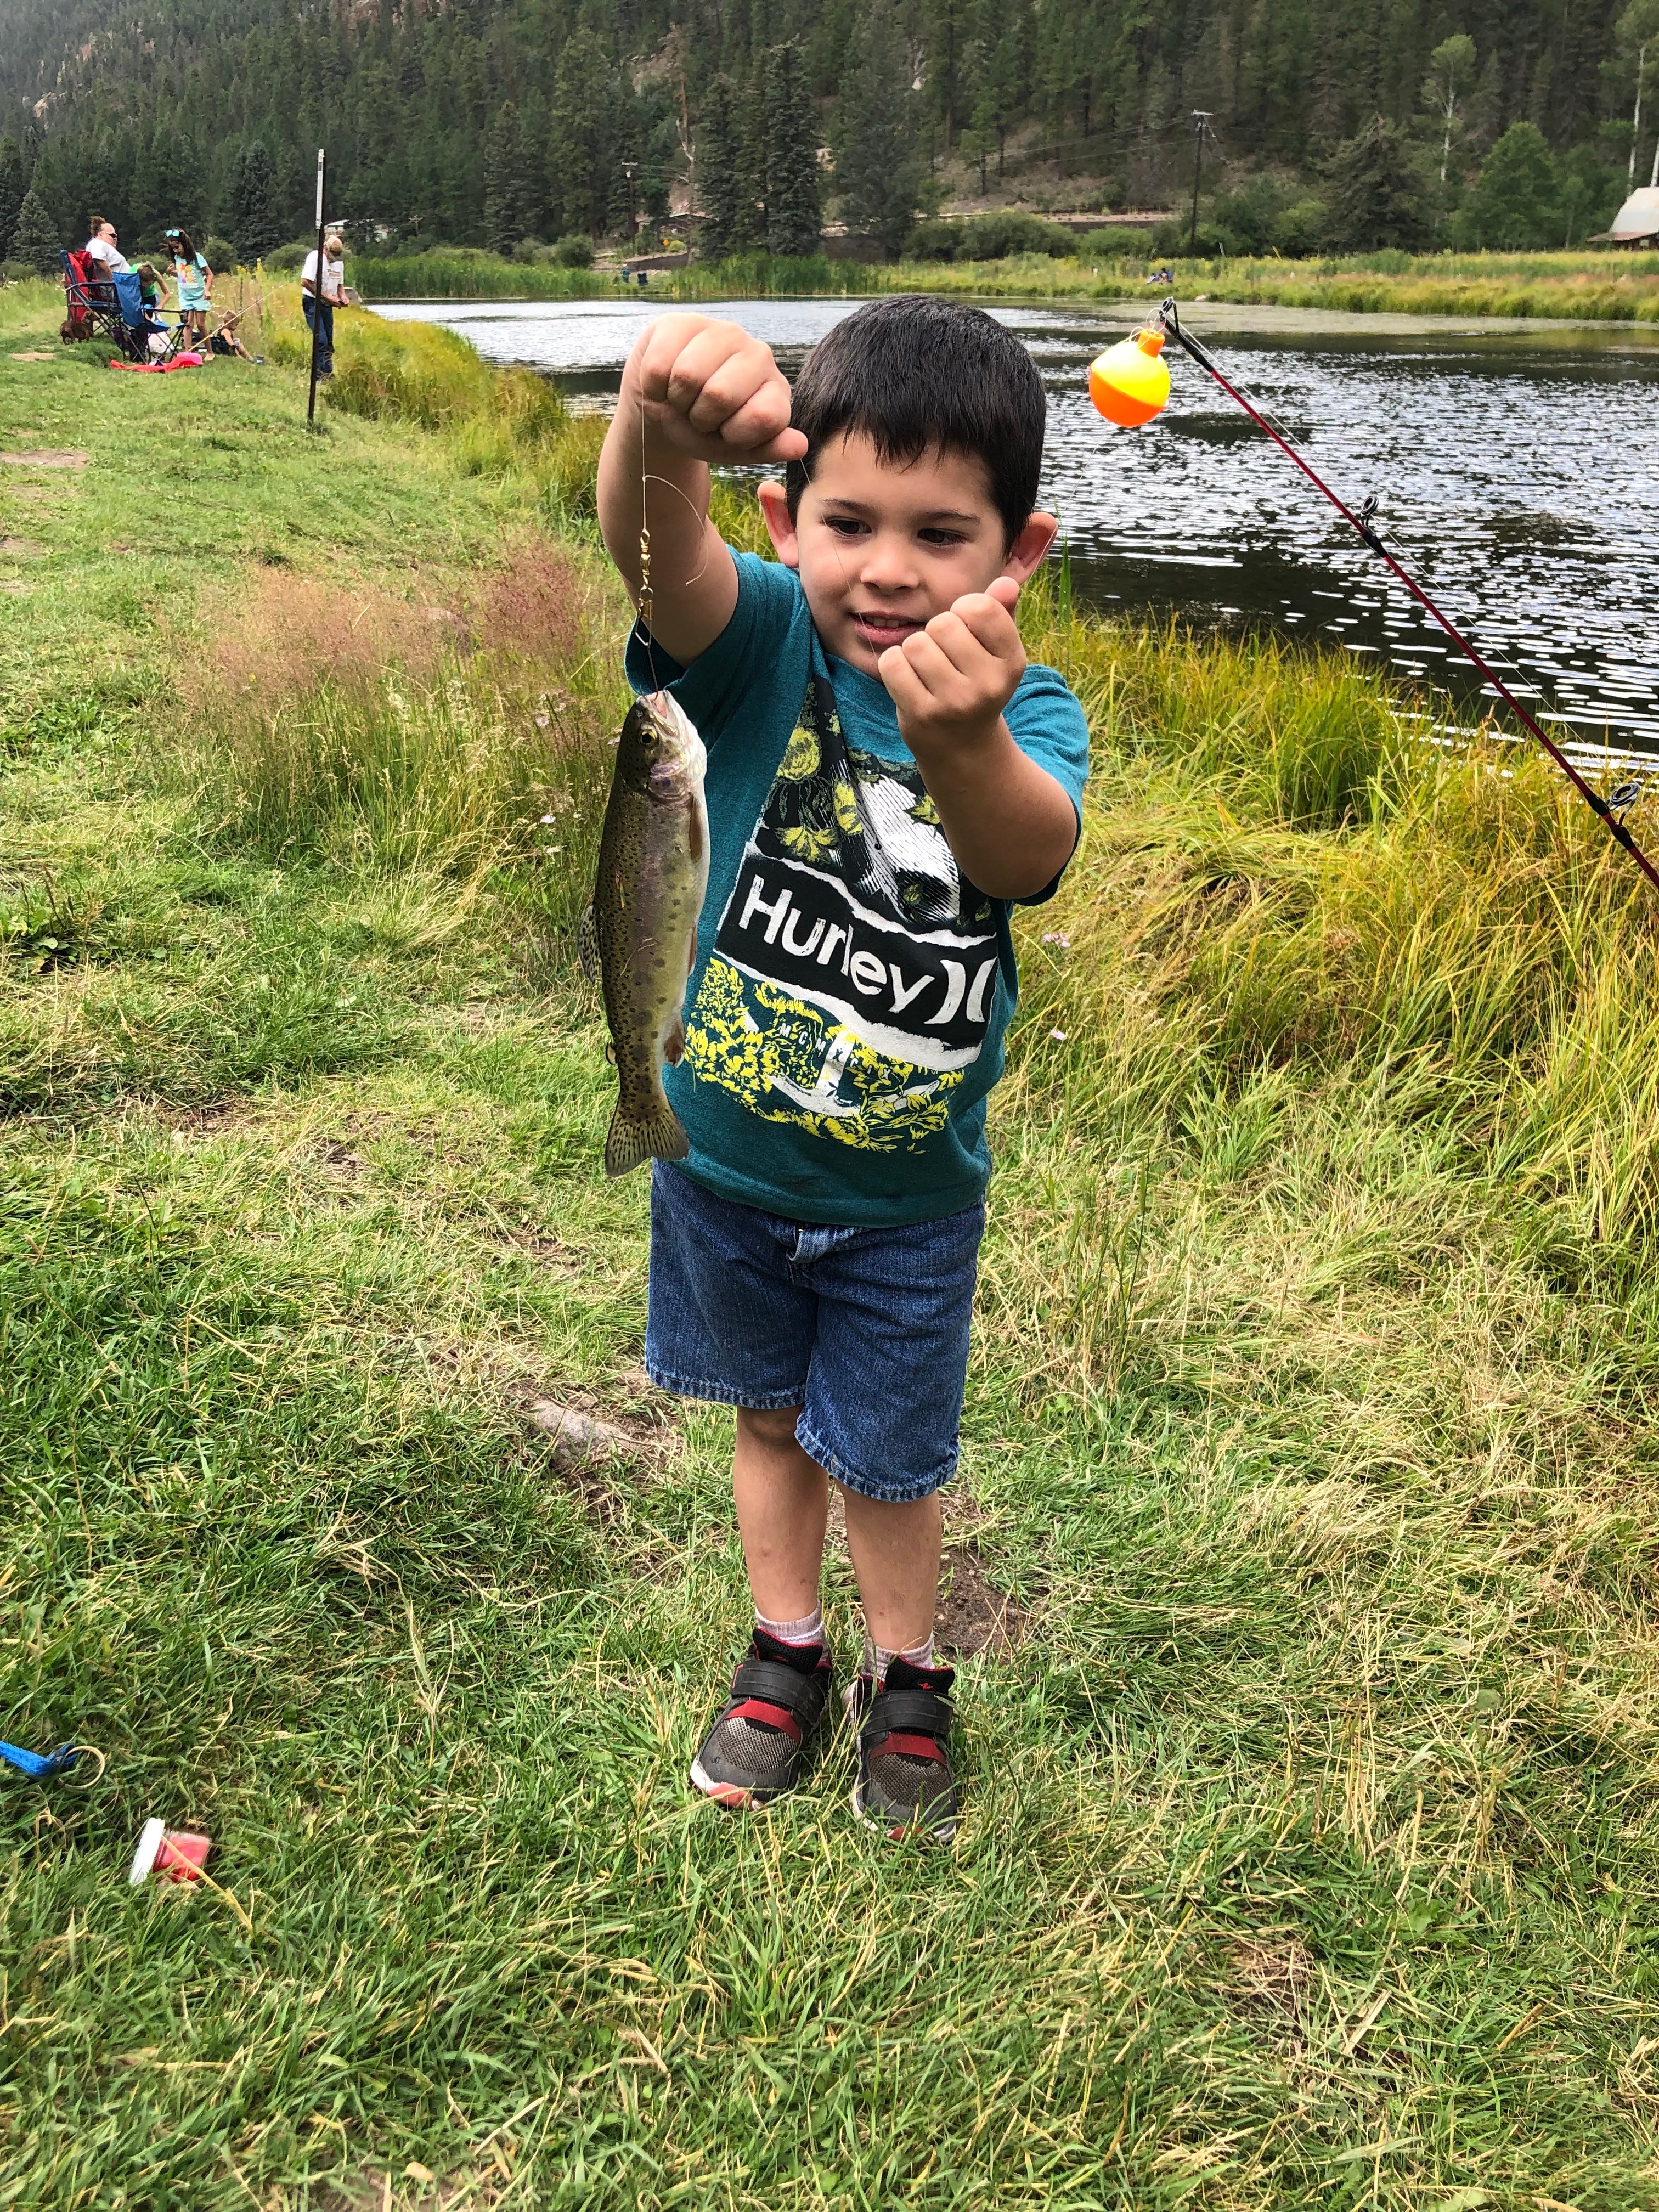 My oldest caught his first fish at Fenton lake